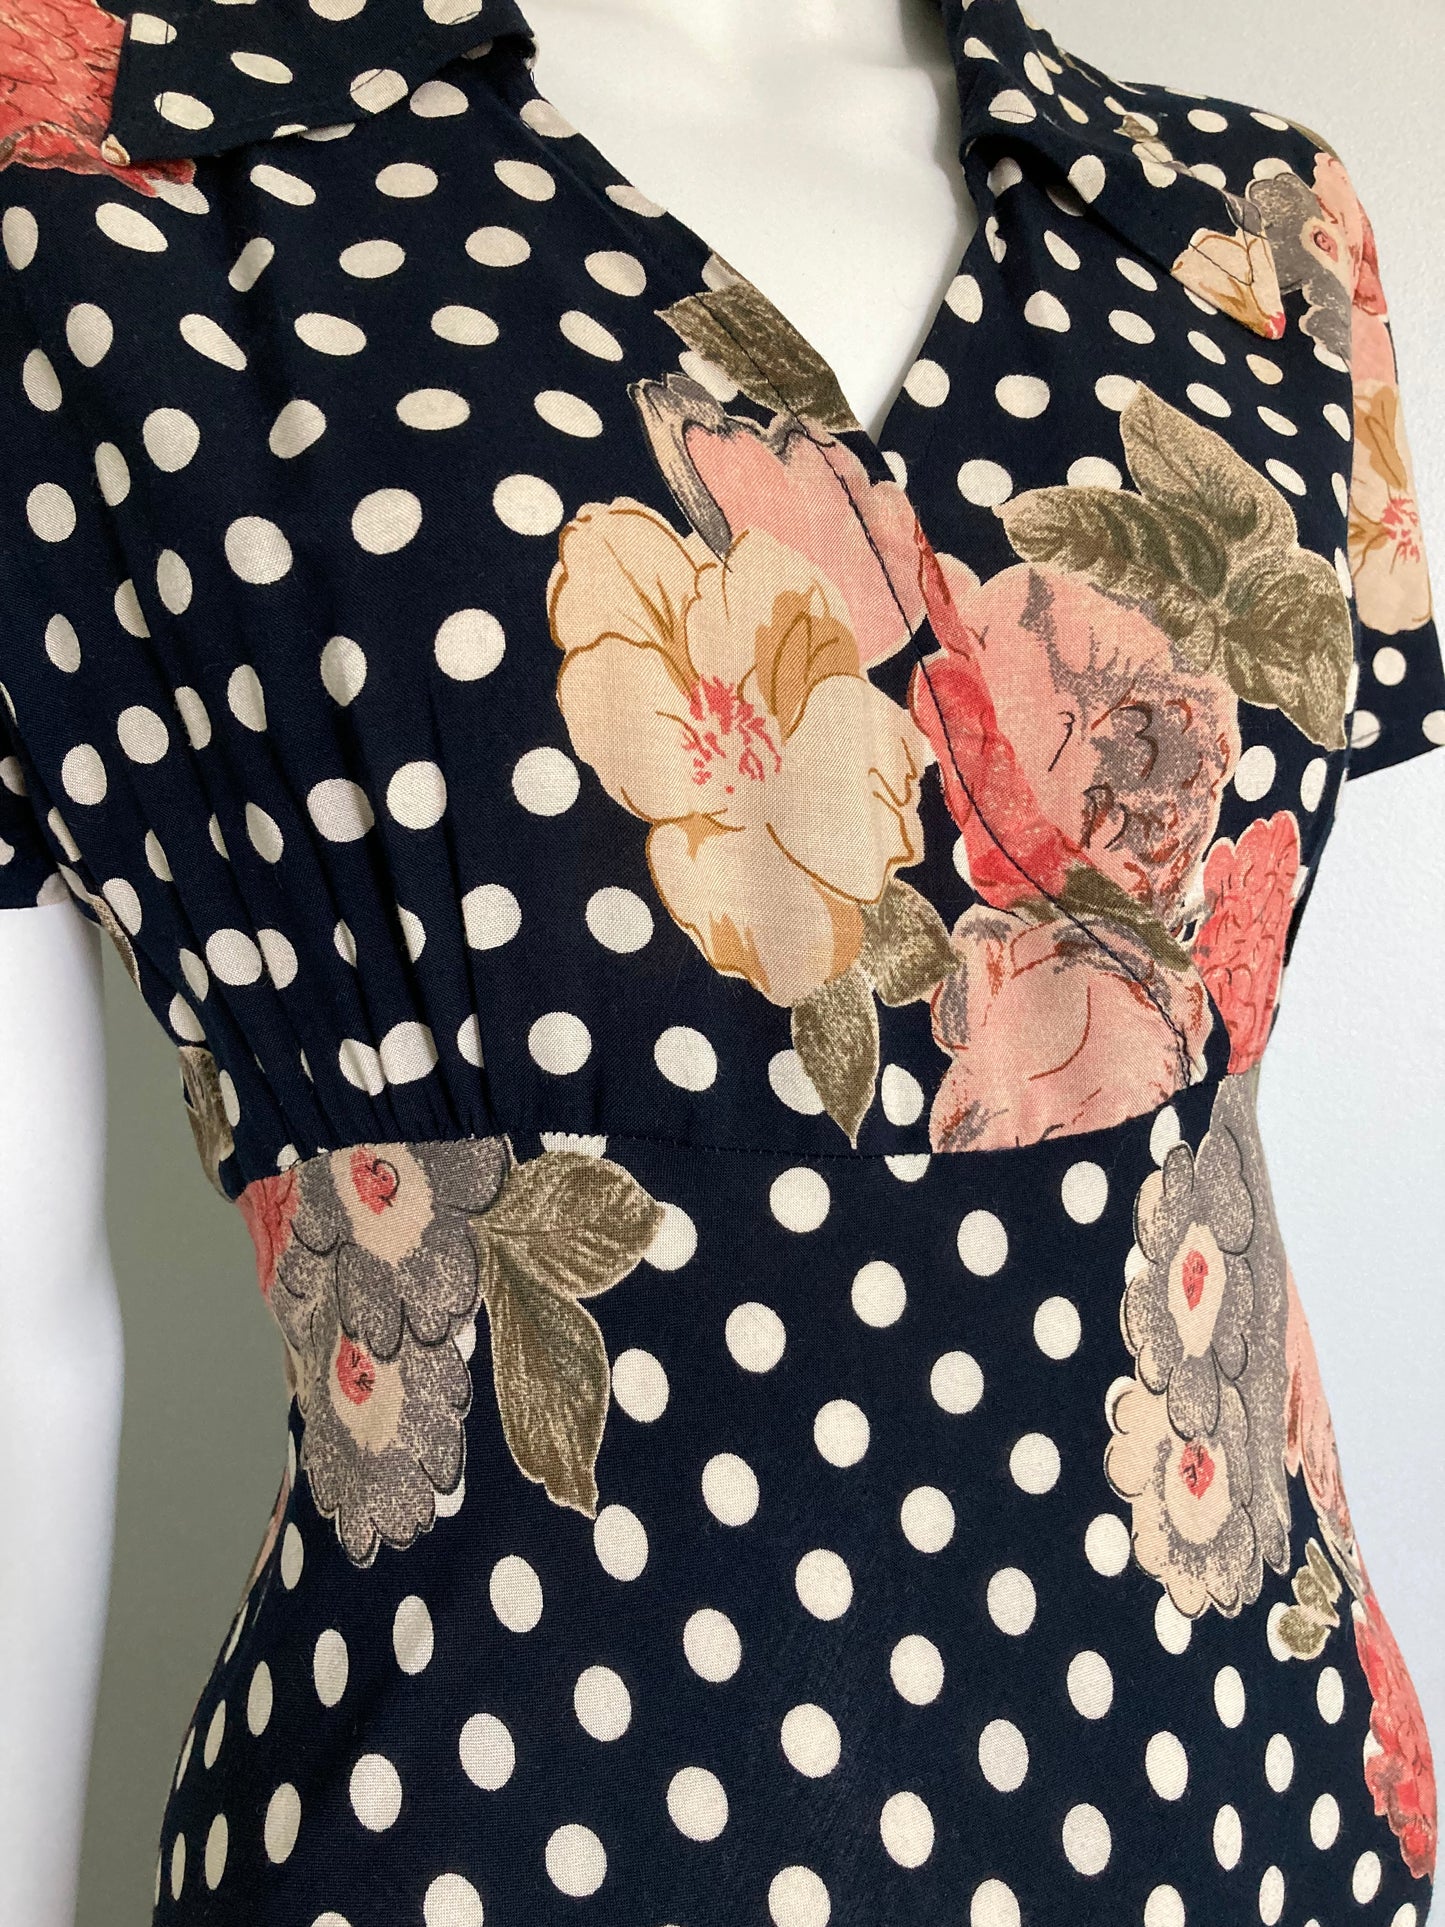 90s Does 40s Bias Cut Rayon Floral Dress with Polka Dots, Size M